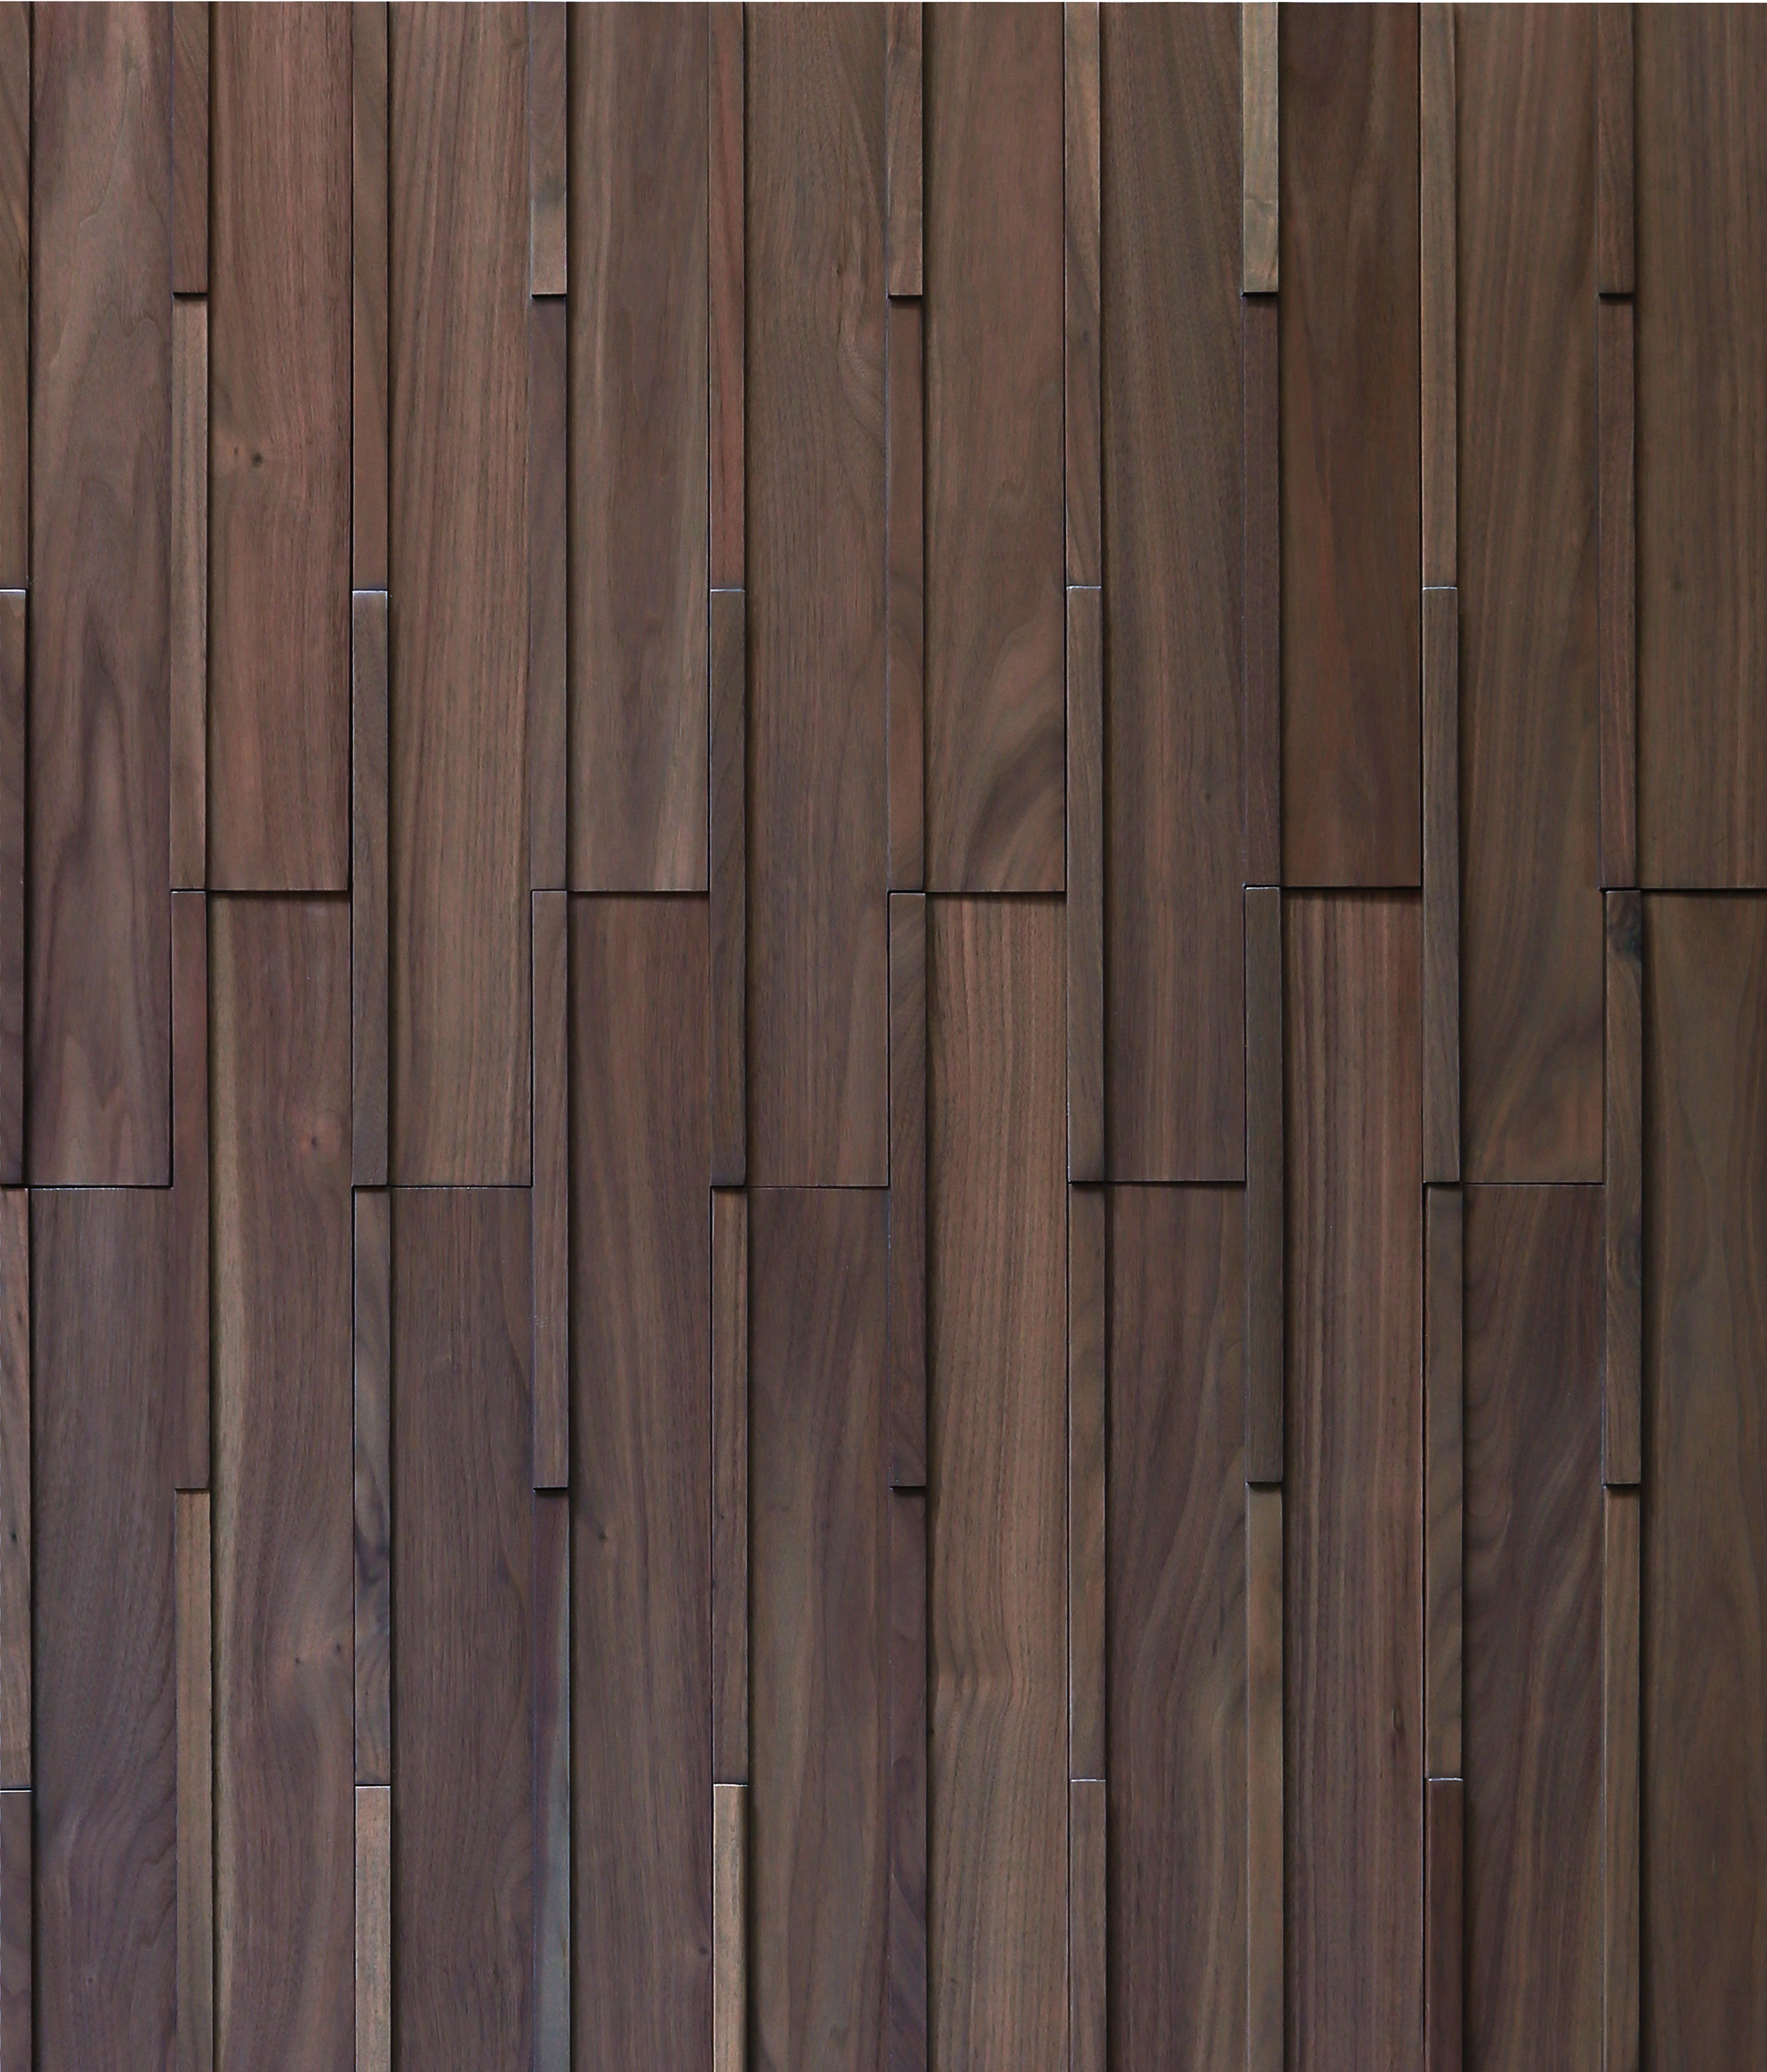 duchateau inceptiv kubik brown ash walnut three dimensional wall natural wood panel conversion varnish for interior use distributed by surface group international